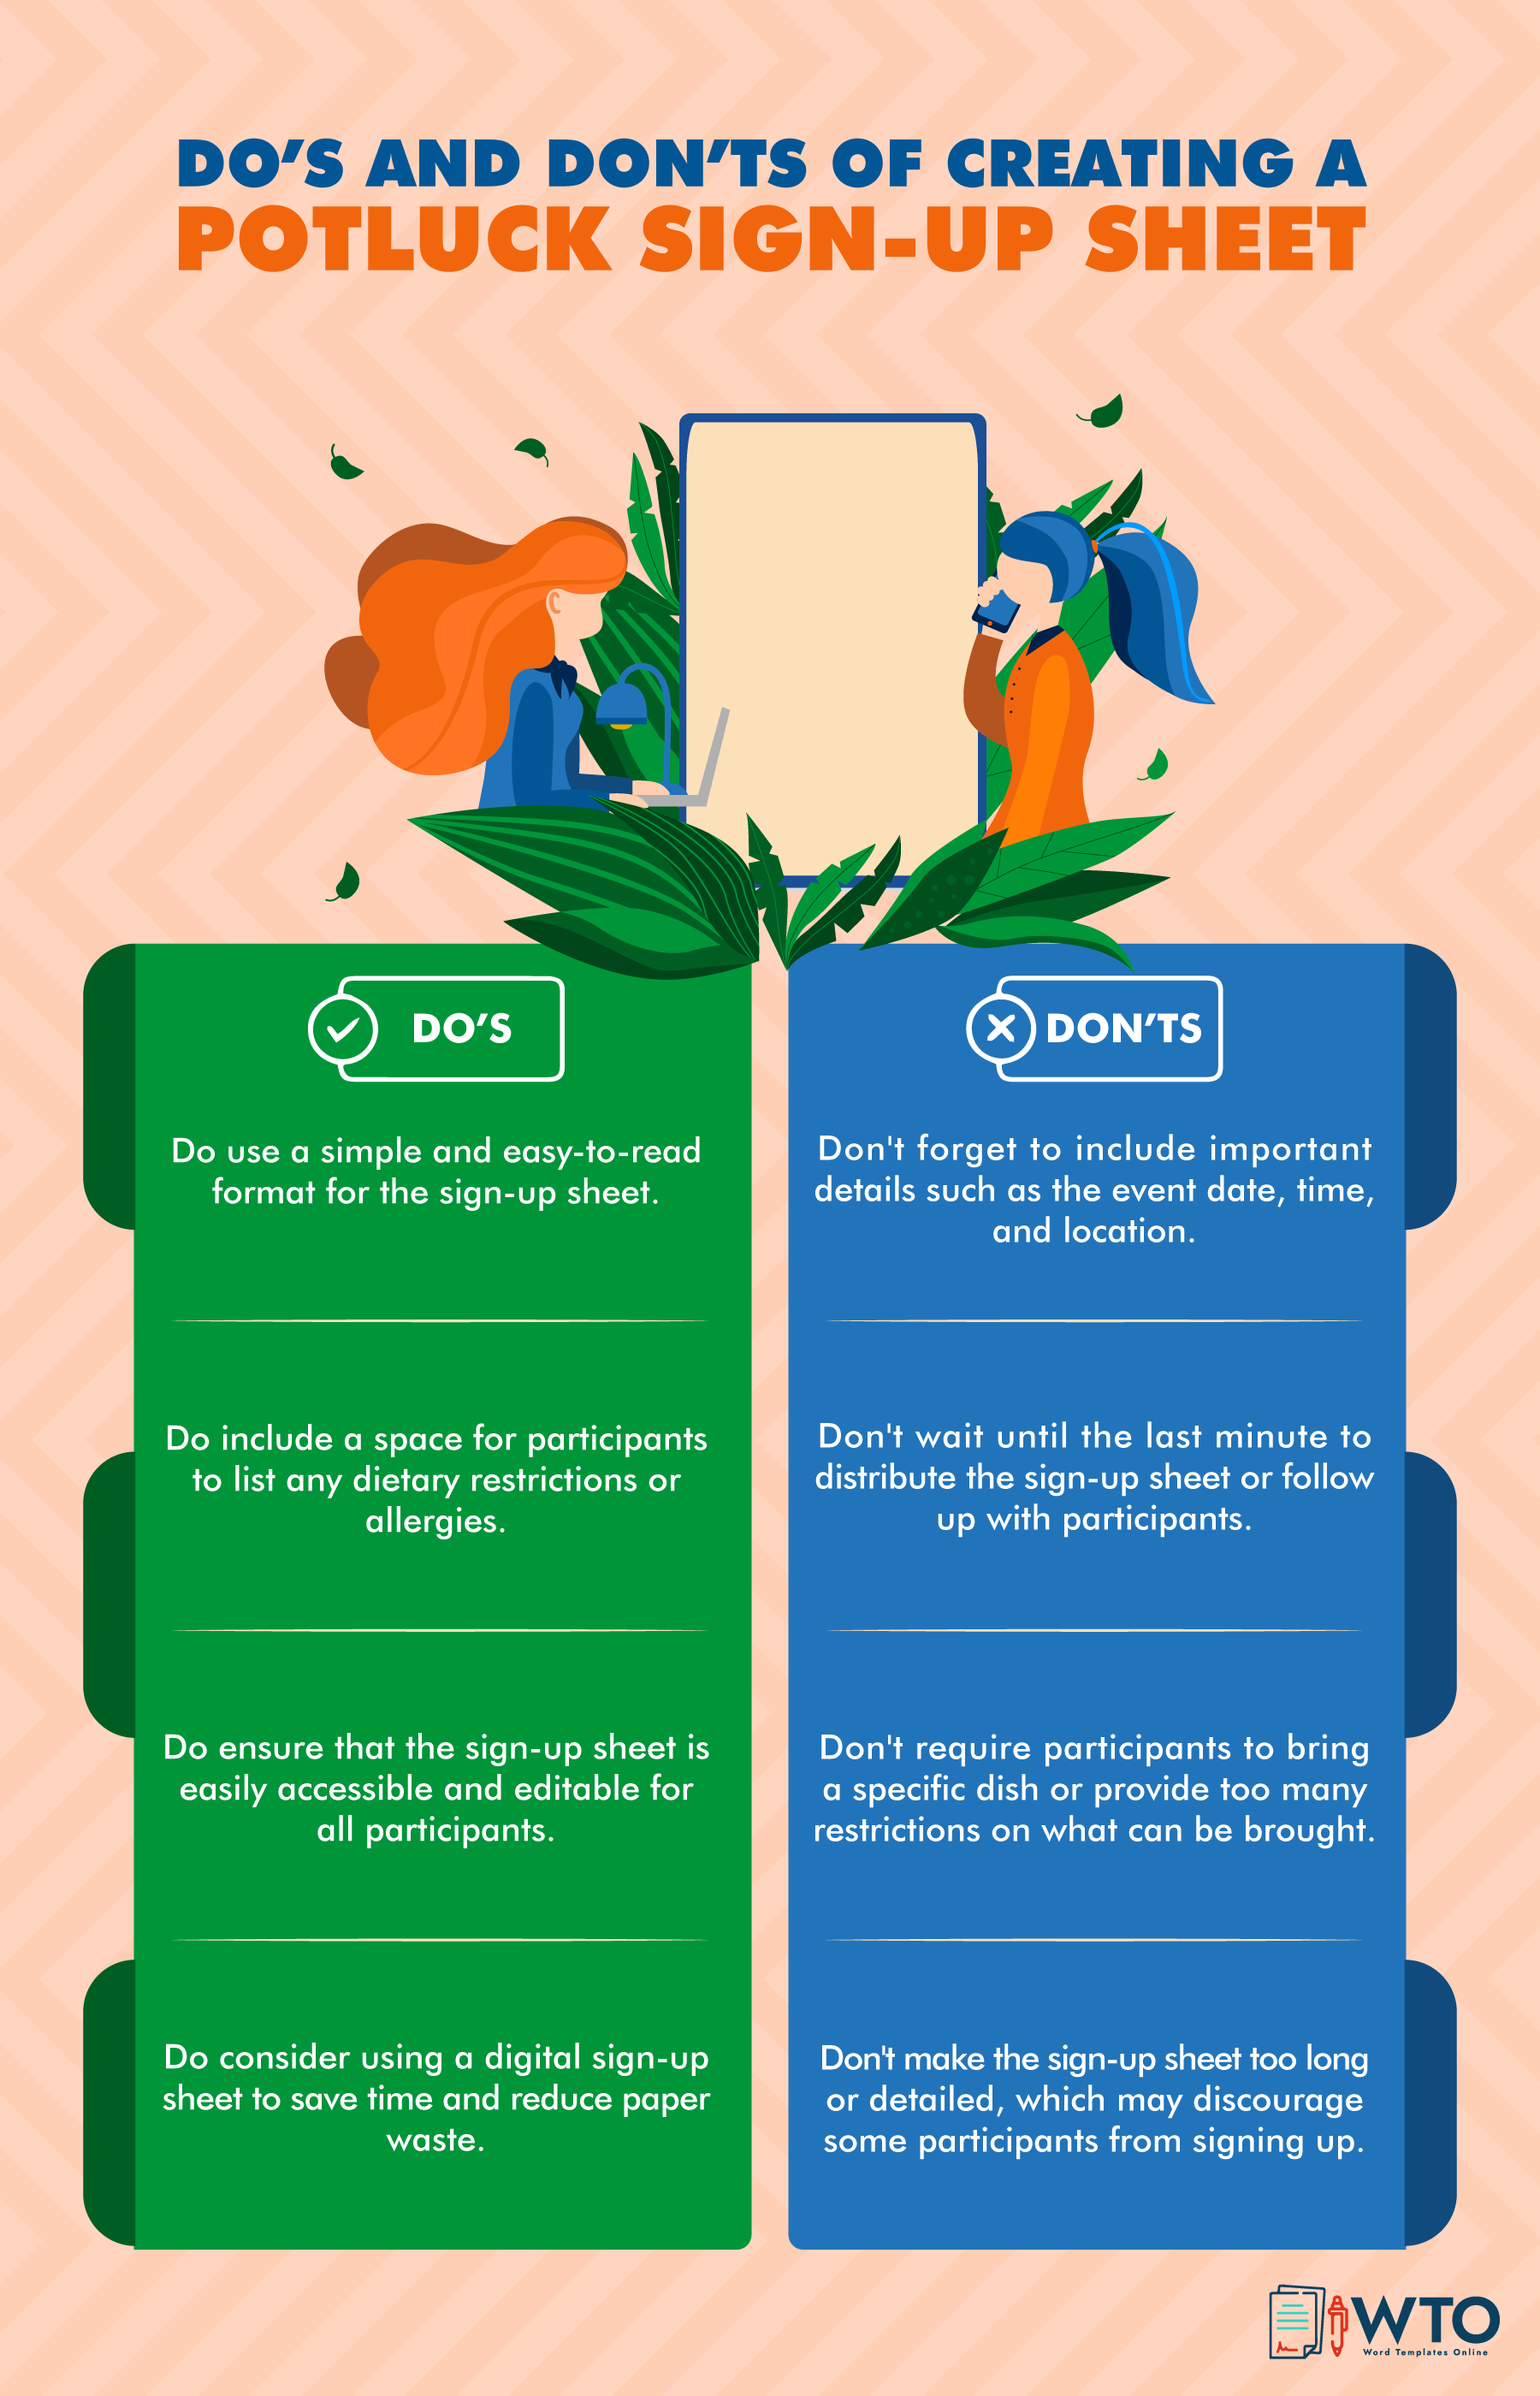 This infographic is about do's & don'ts of creating potluck sign-up sheet.